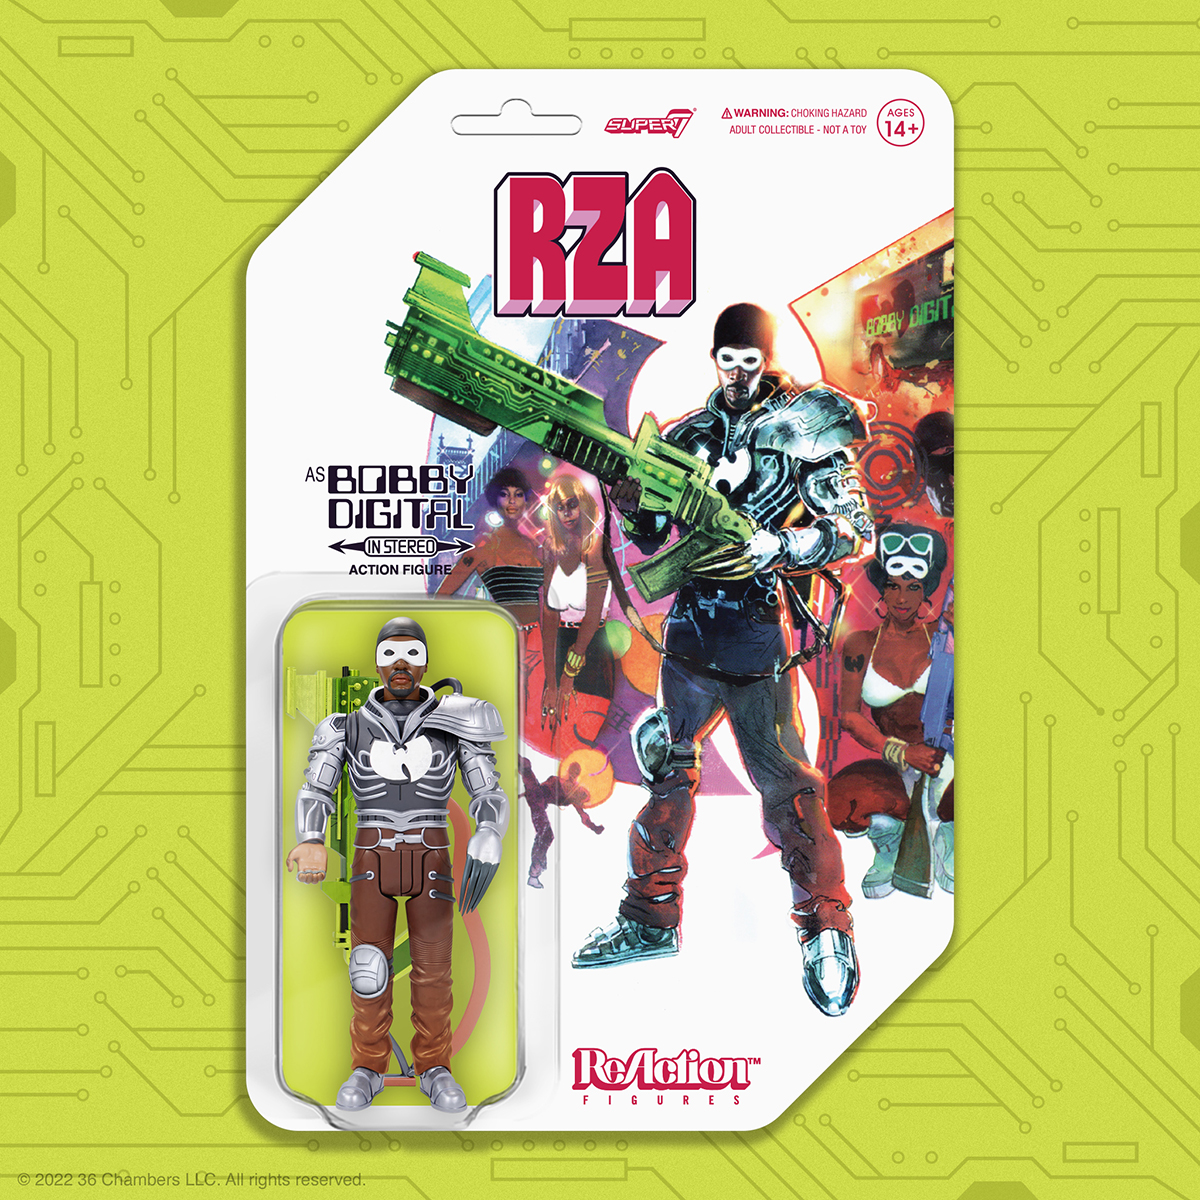 For his debut studio album, rapper and producer @RZA created Bobby Digital his fun-loving, hedonistic alter-ego. Don’t get caught with an analog collection! Snap up the RZA ReAction Figure of Bobby Digital, available and shipping now on Super7.com!